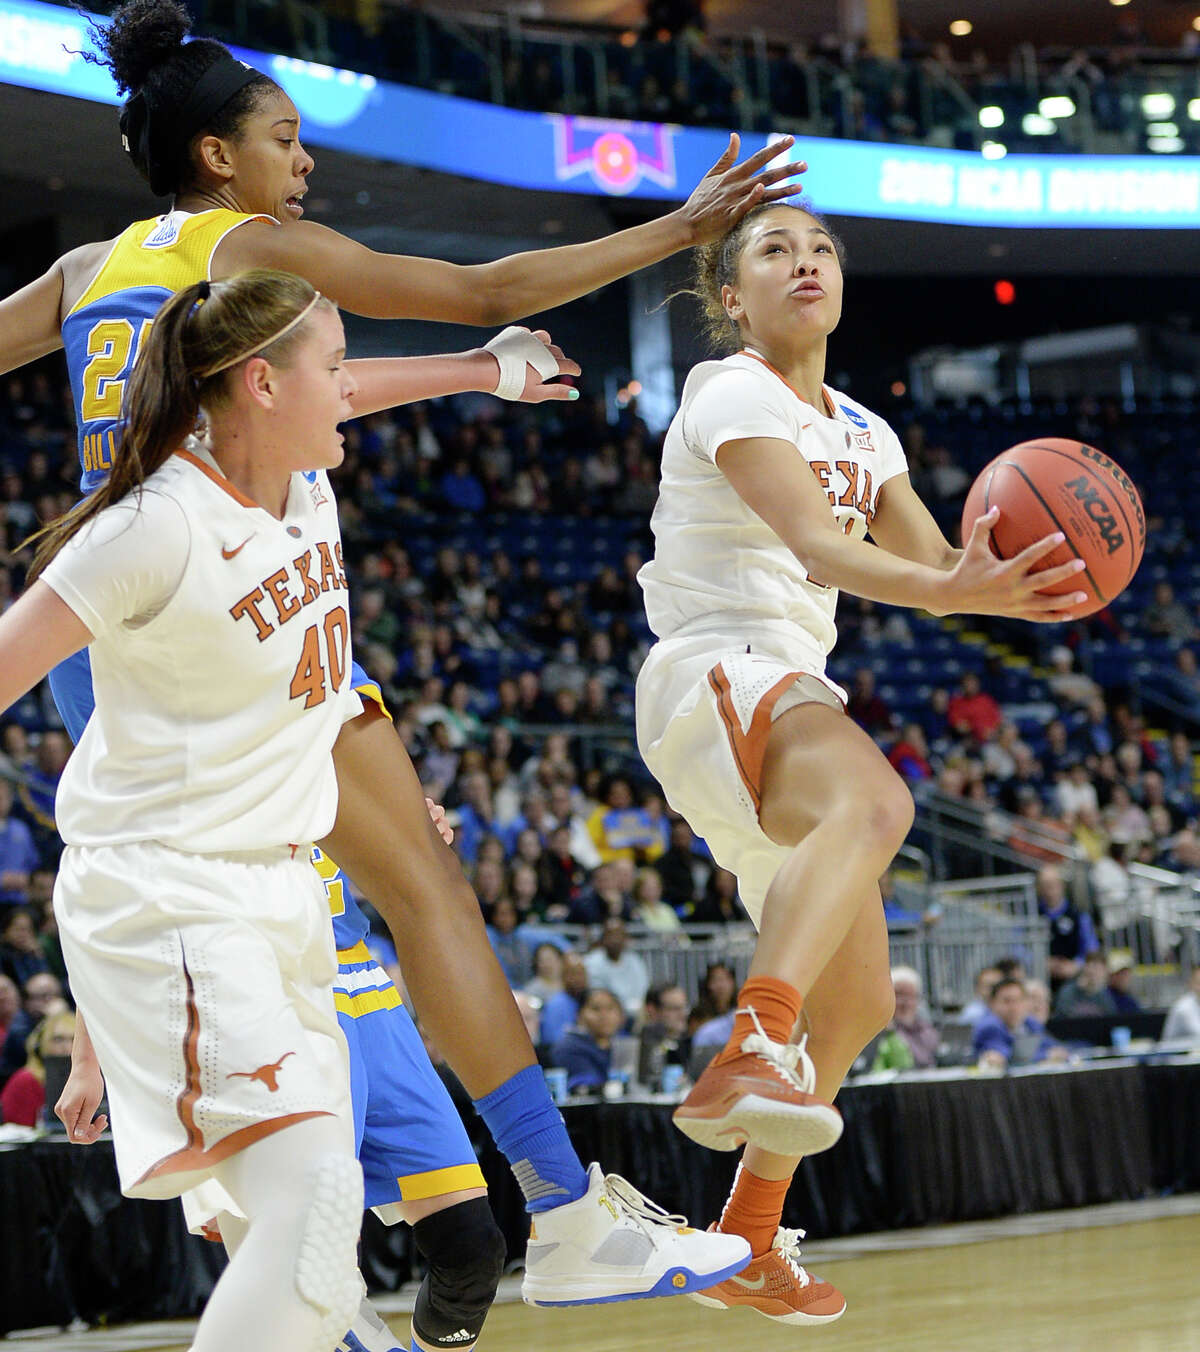 Texas?’ Brooke McCarty, right, shoots against UCLA?’s Monique Billings, back left, as teammate Kelsey Lang defends during the second half of an NCAA college basketball game in the regional semifinals of the women's NCAA Tournament, Saturday, March 26, 2016, in Bridgeport, Conn. Texas won 72-64. (AP Photo/Jessica Hill)